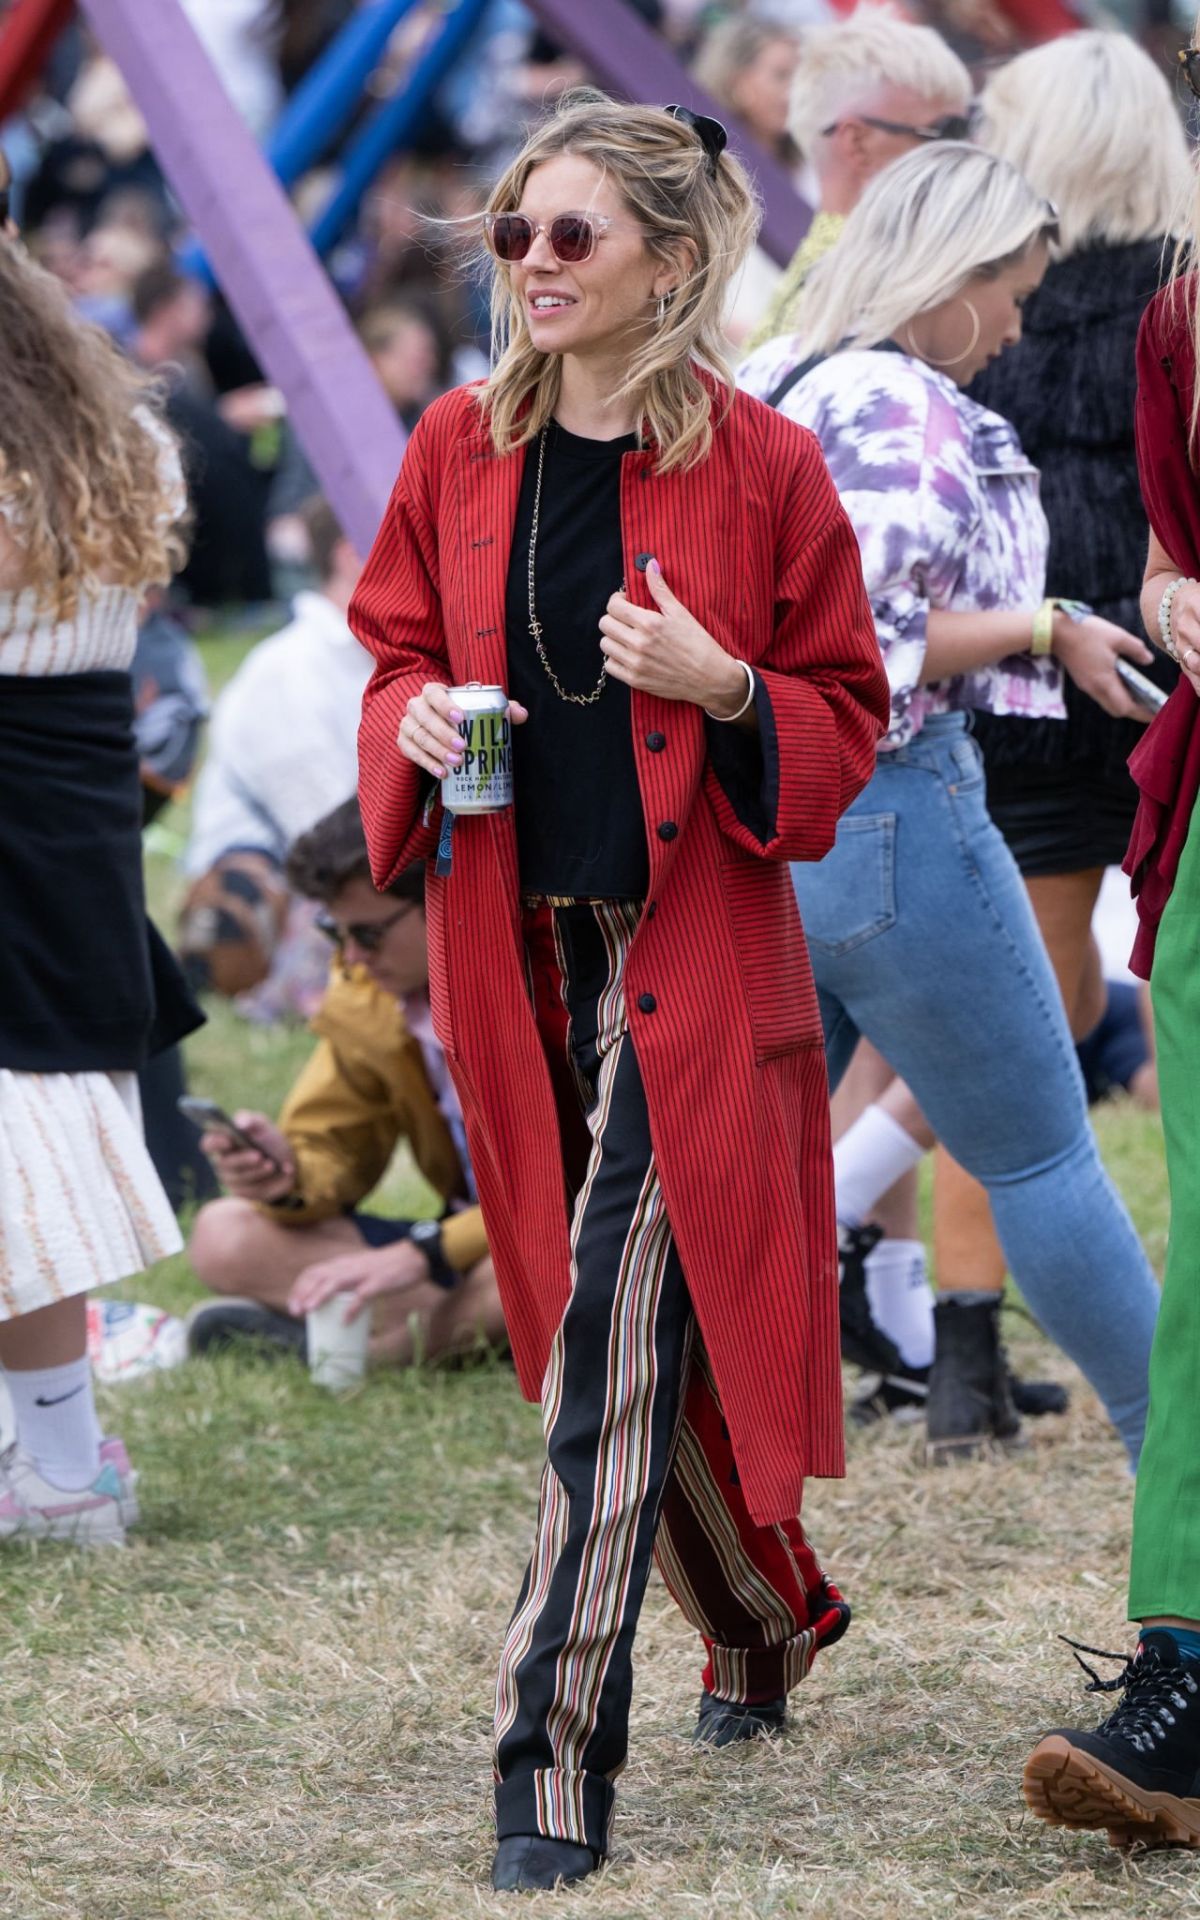 SIENNA MILLER Out and About at Glastonbury Festival 06/24/2022 – HawtCelebs